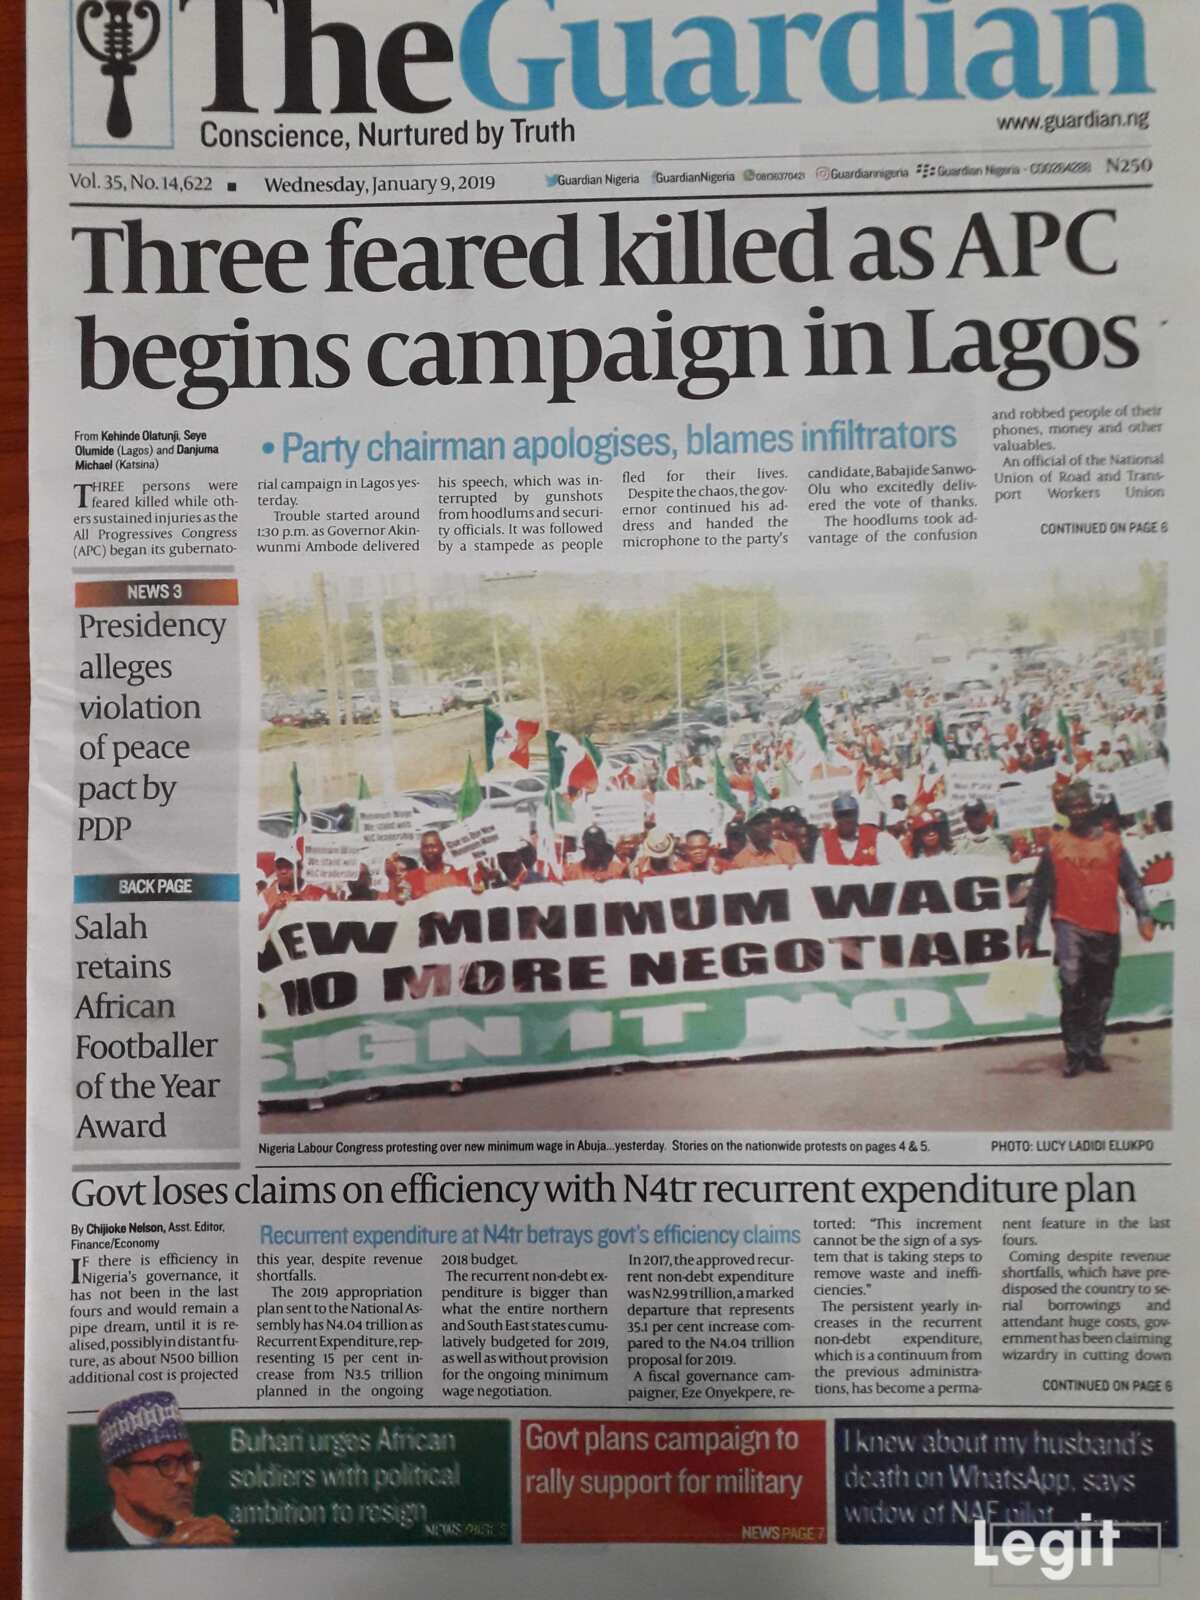 The Guardian newspaper for Wednesday, January 9. Credit: Legit.ng